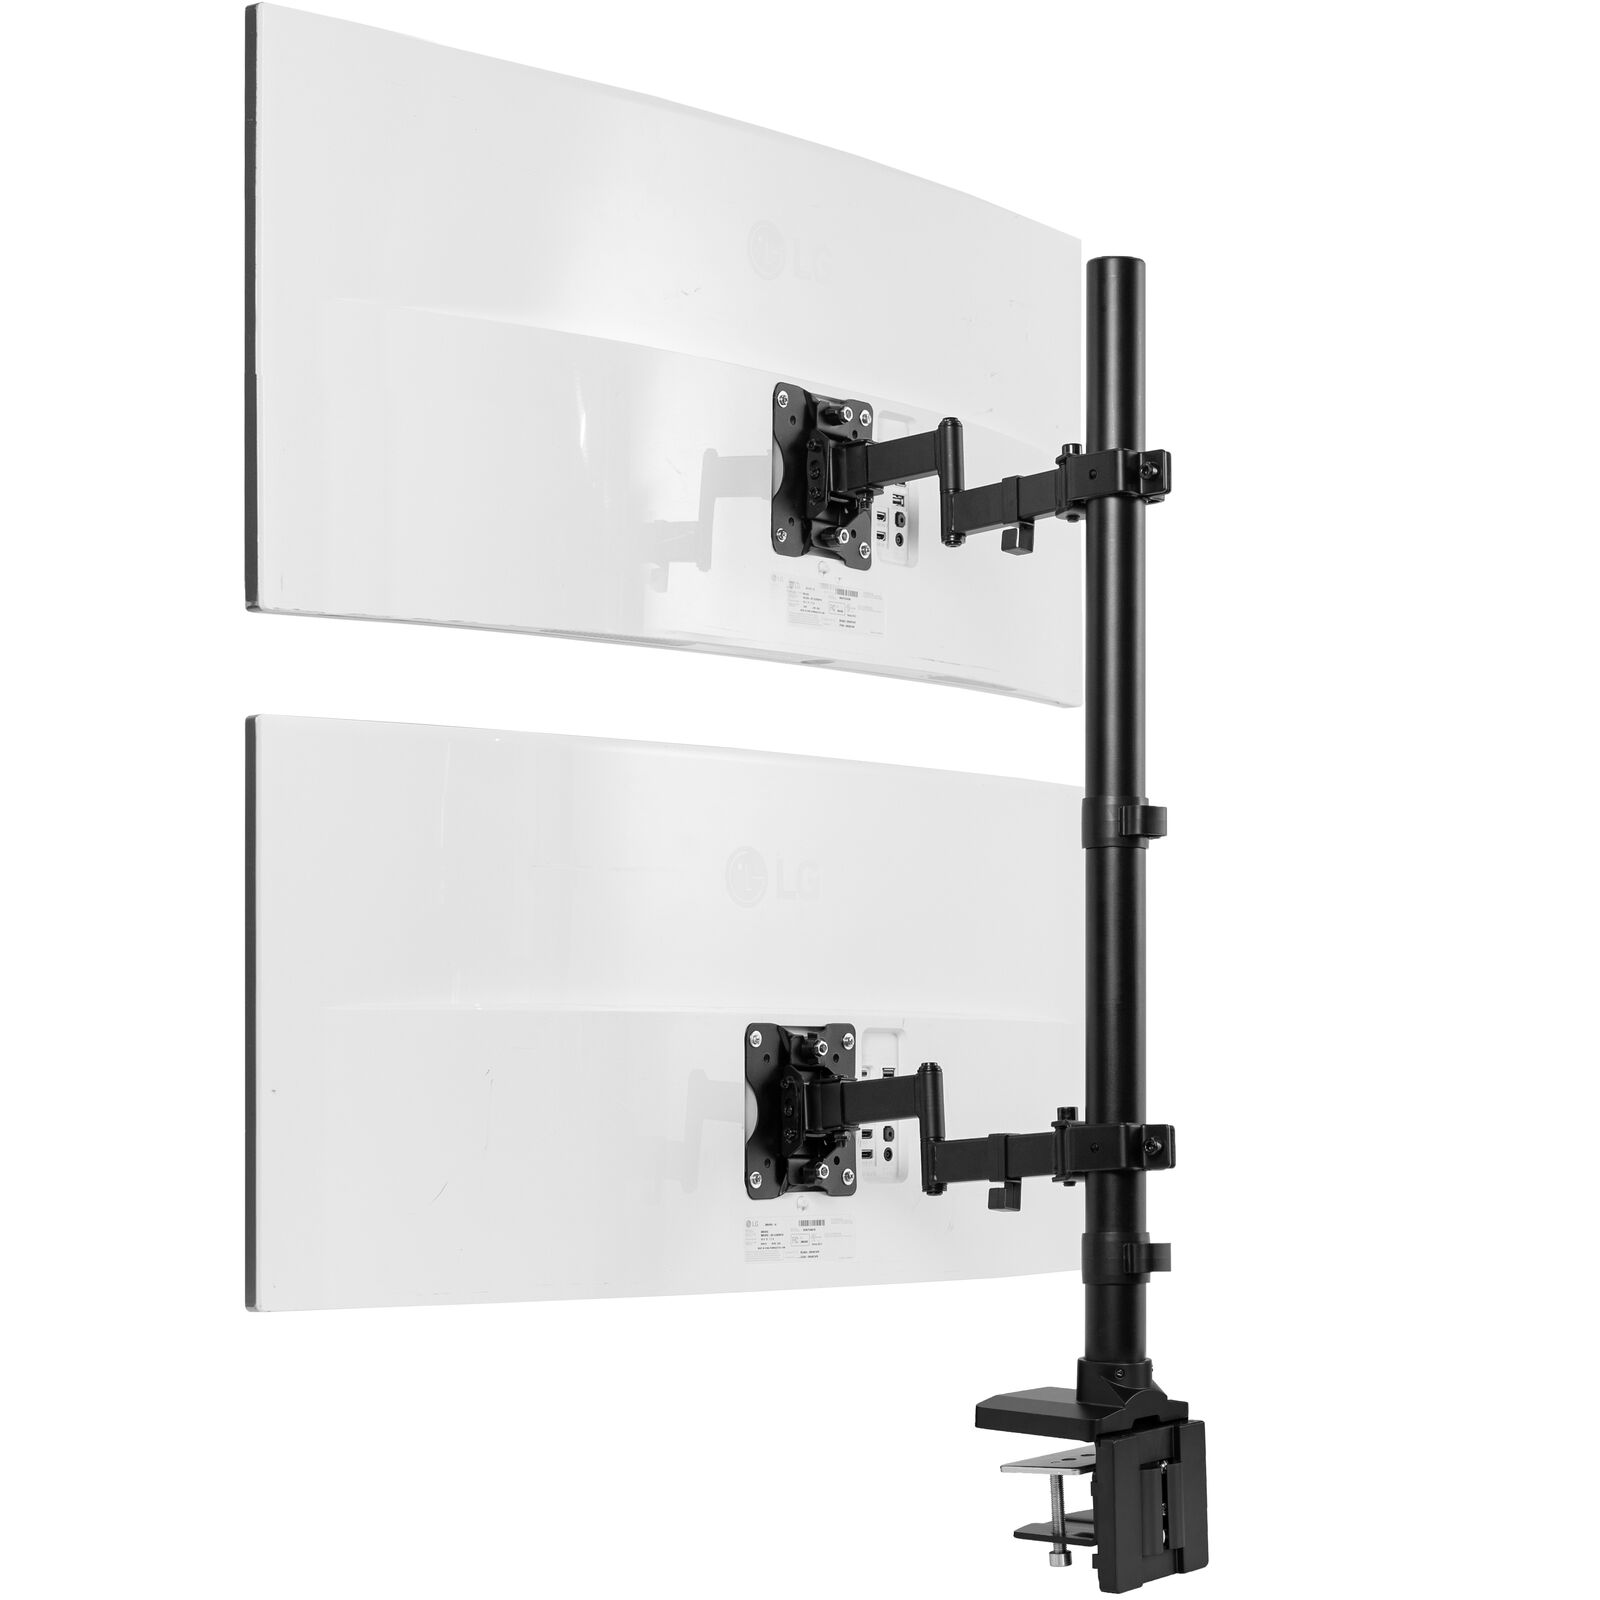 VIVO Ultra Wide Dual Monitor Mount, Extra Tall Stand, Fits up to 43